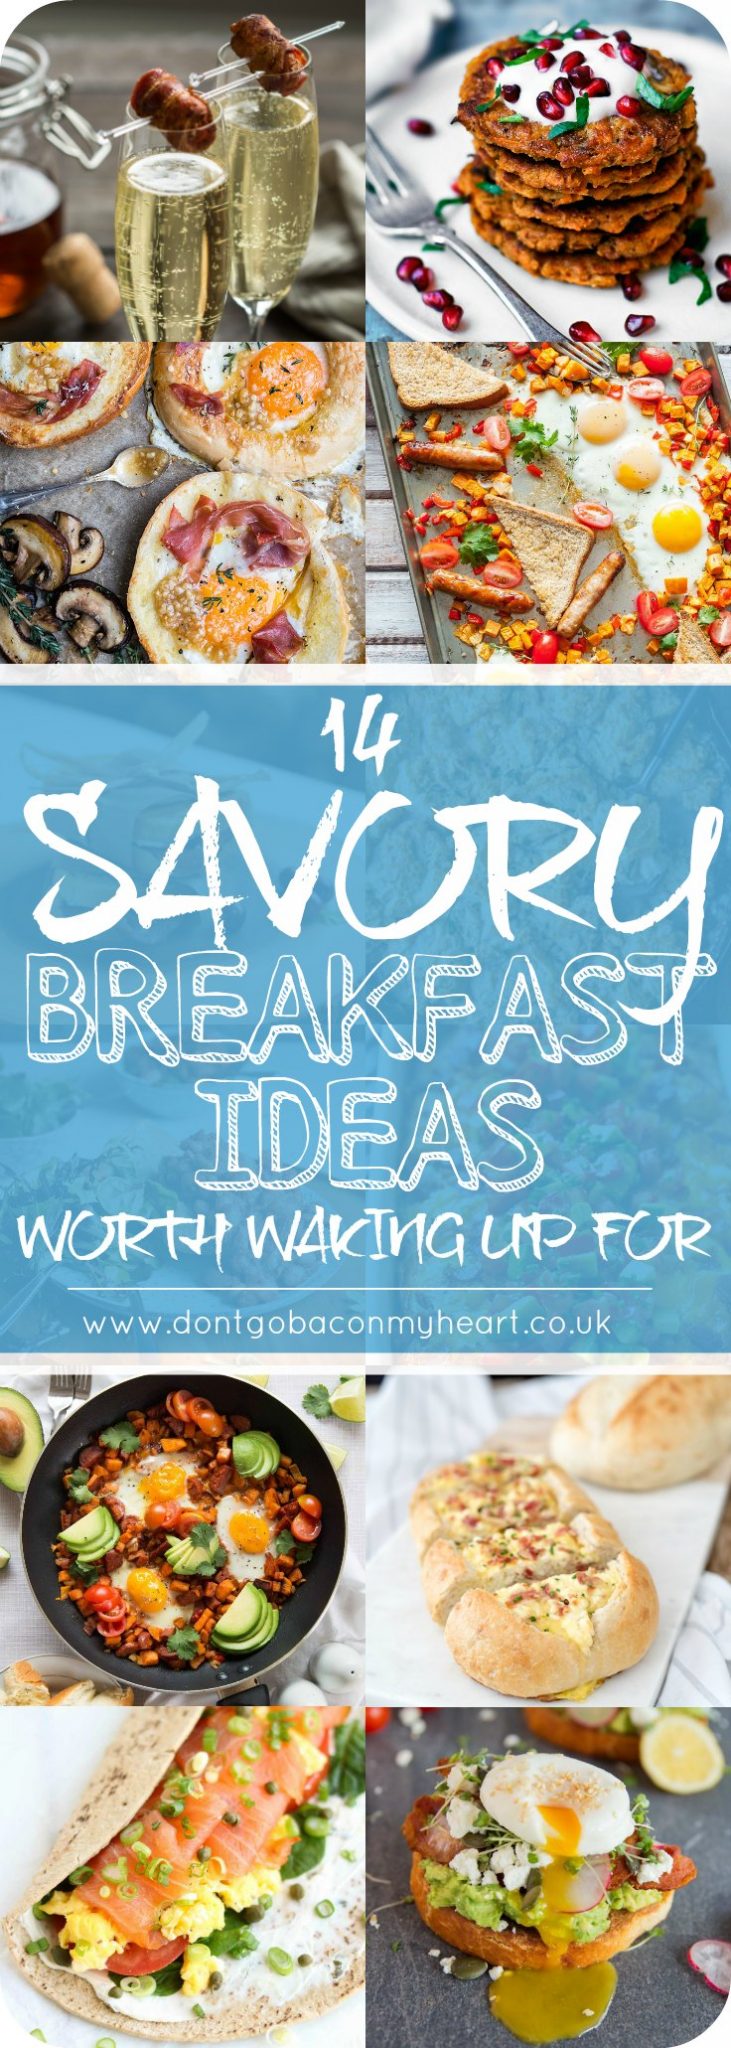 14 Savory Breakfast Ideas Worth Waking Up For